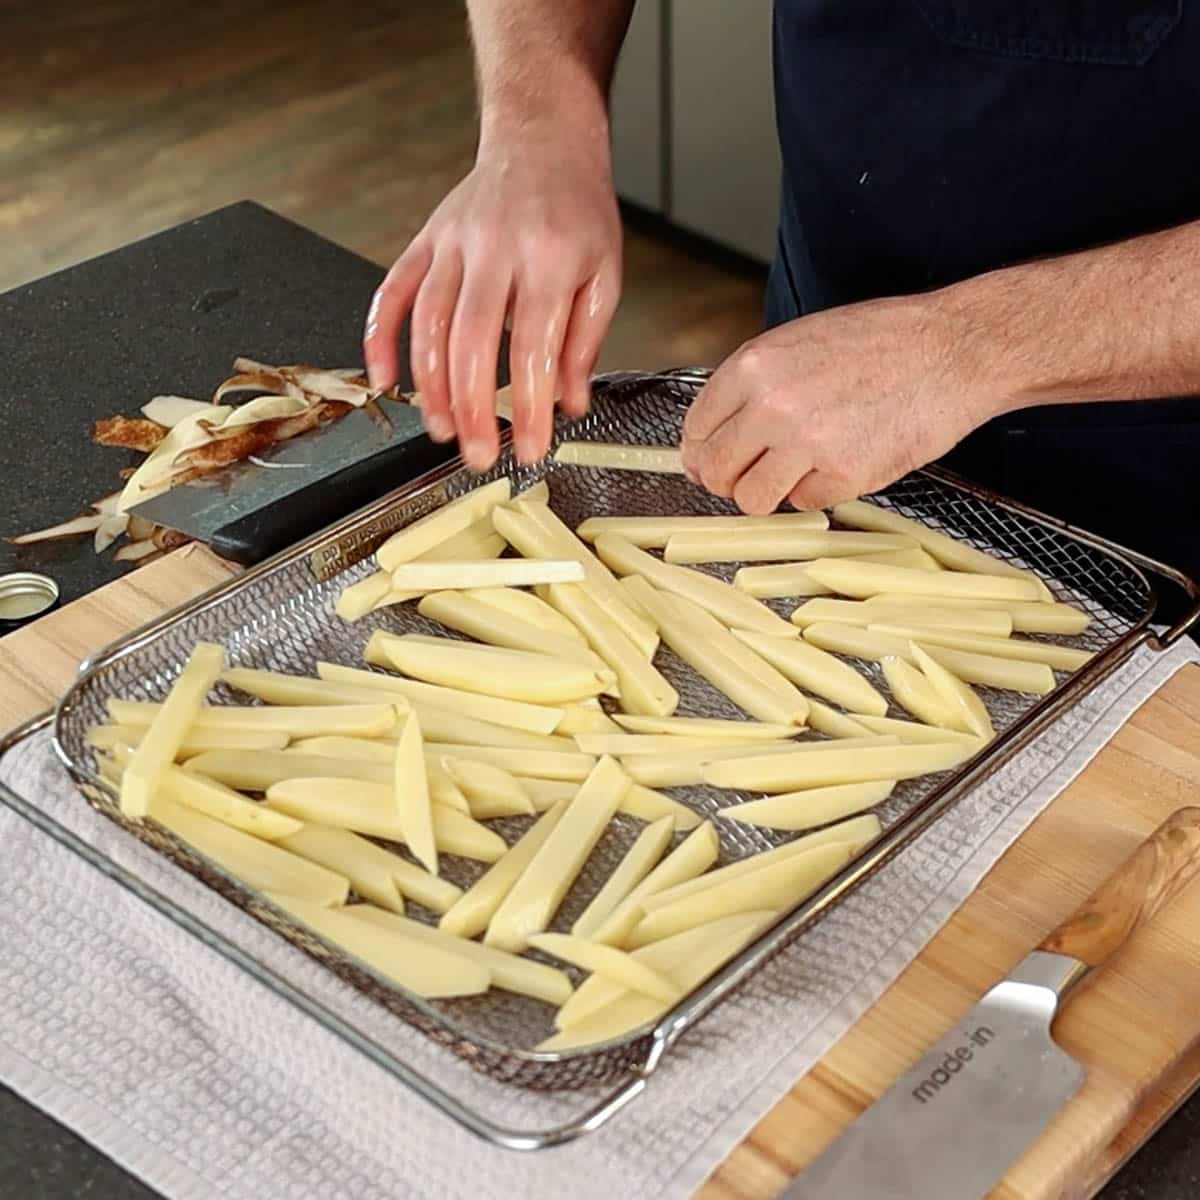 Arranging French fries in an air fryer basket